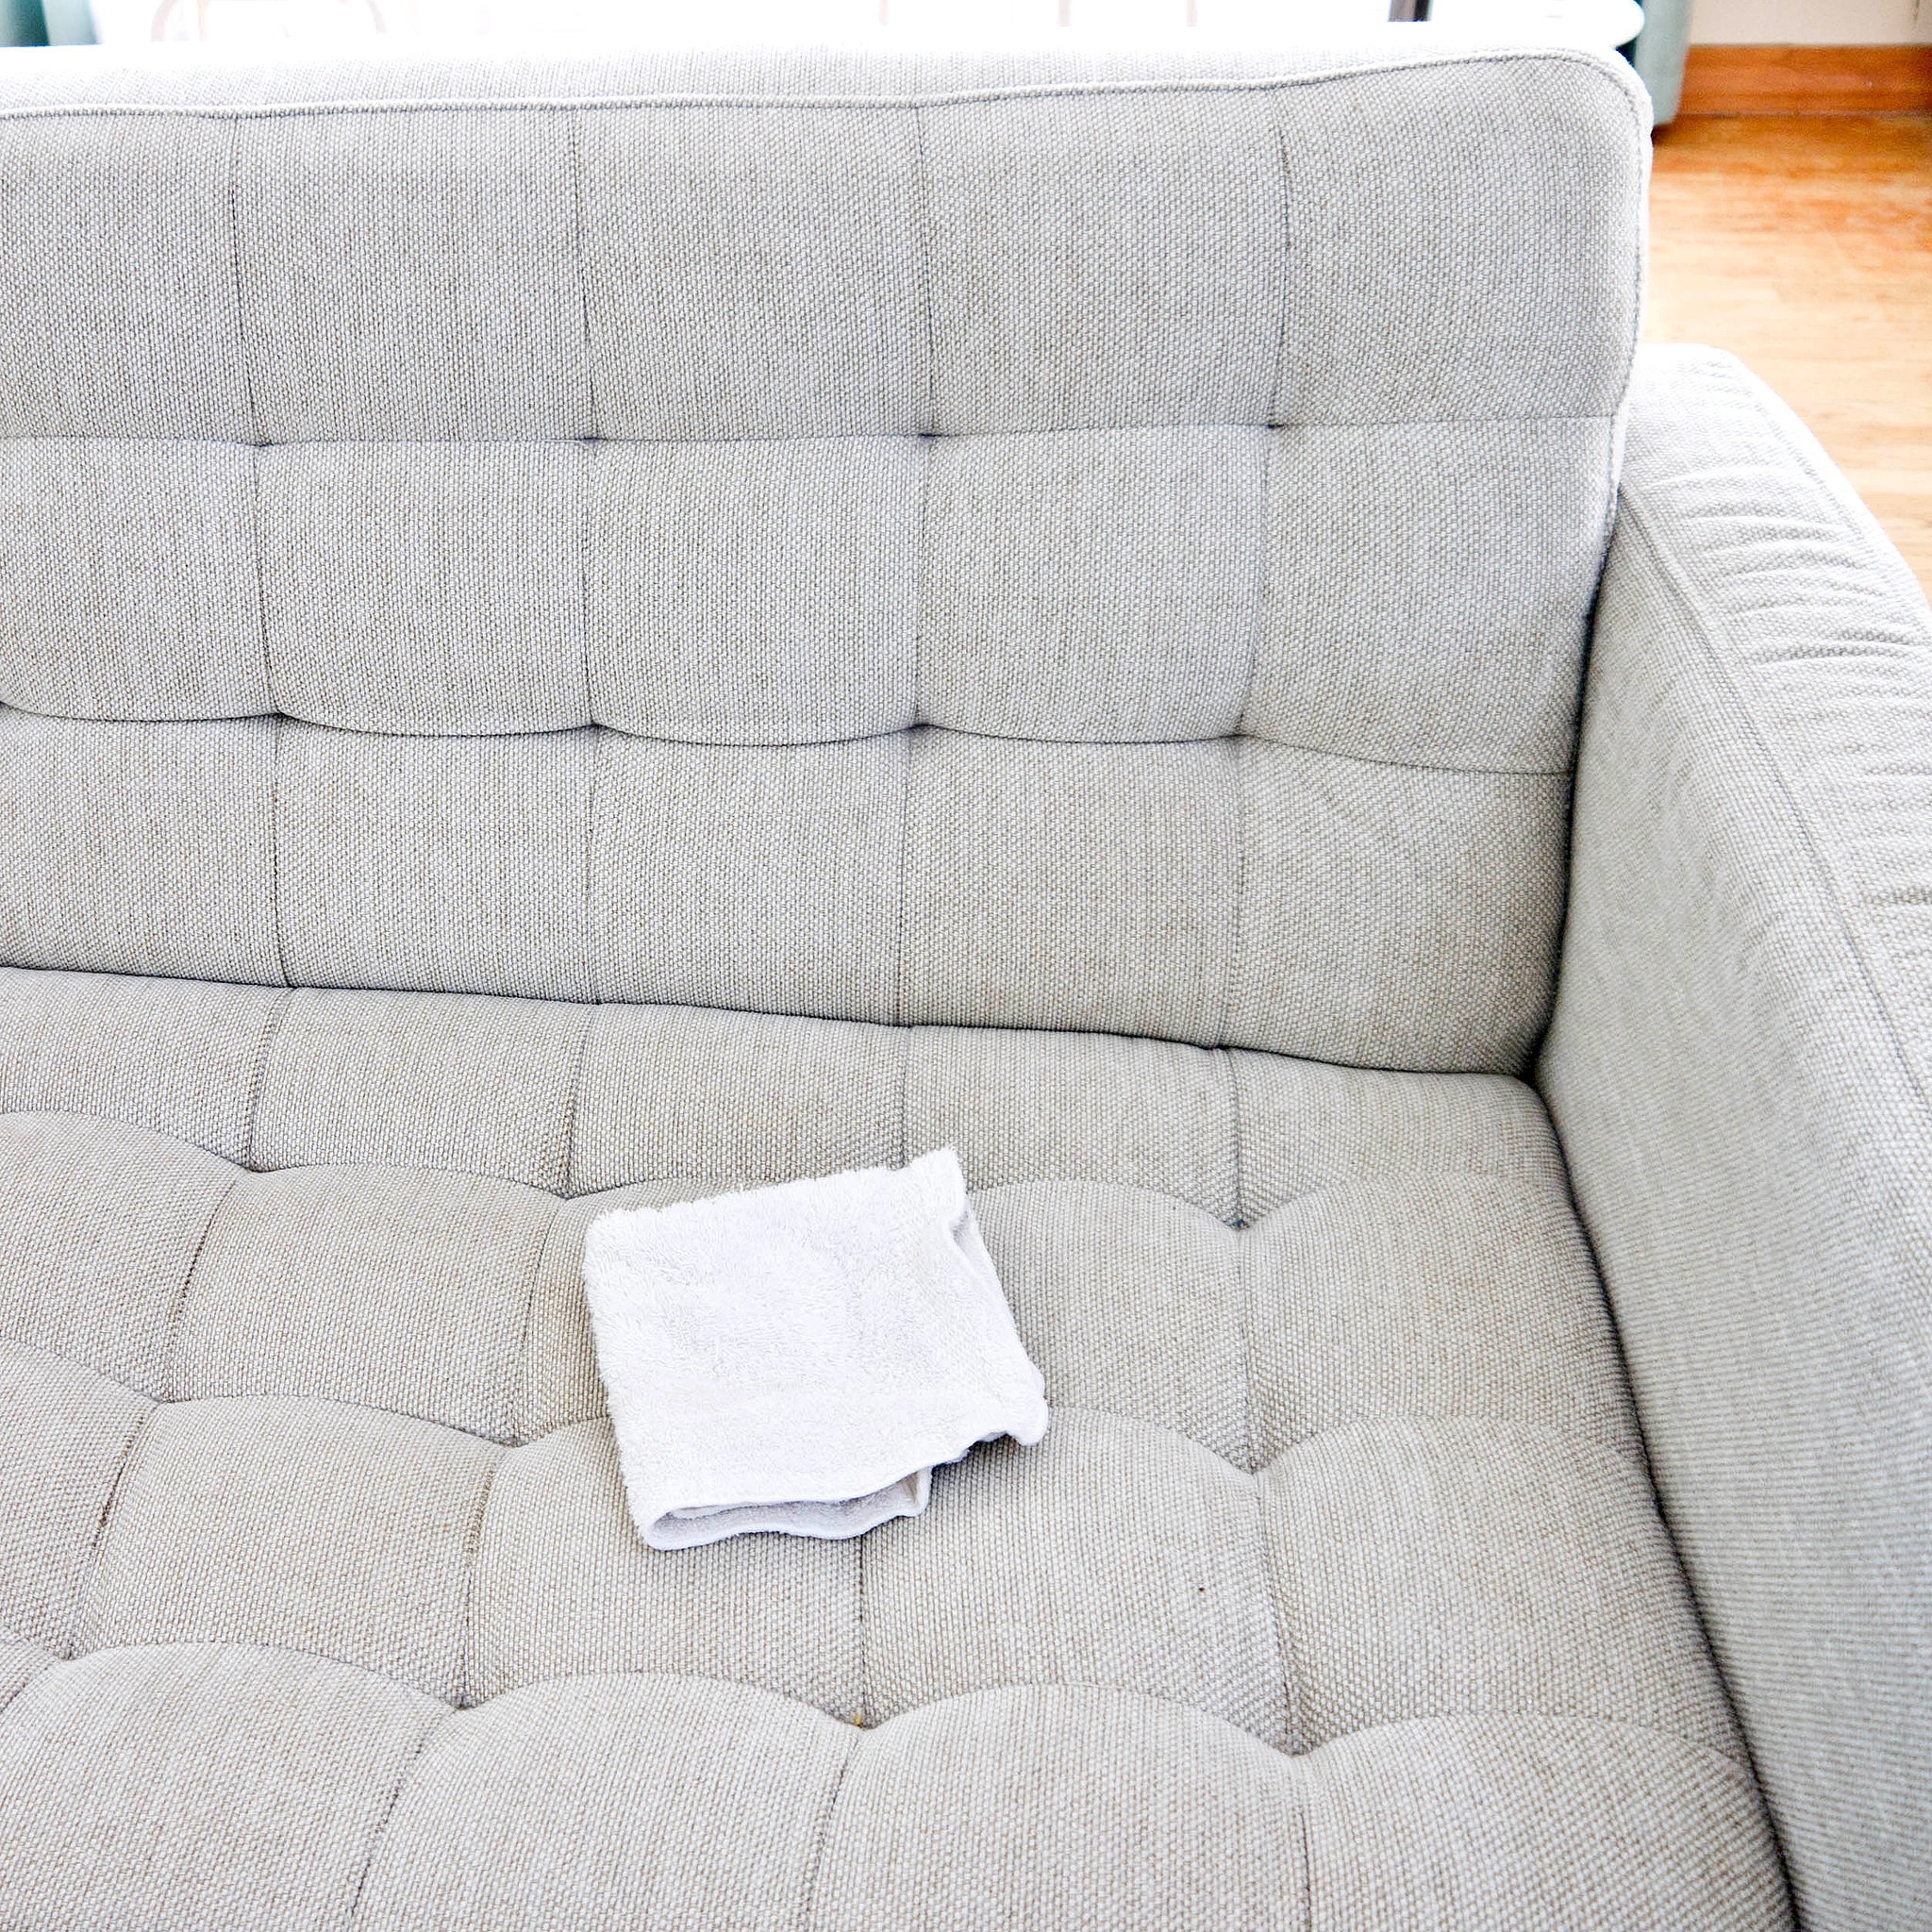 How to Clean a Natural-Fabric Couch  POPSUGAR Smart Living